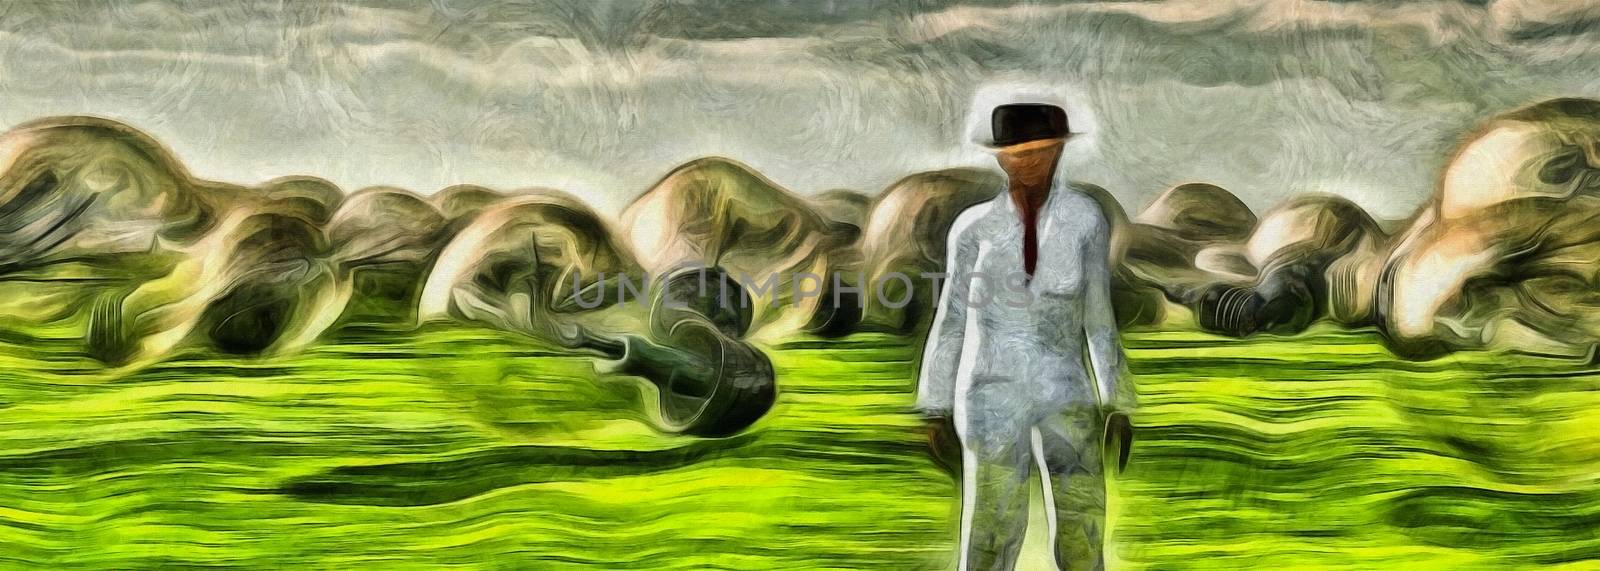 Surreal painting. Man in white suit stands in field with giant light bulbs.